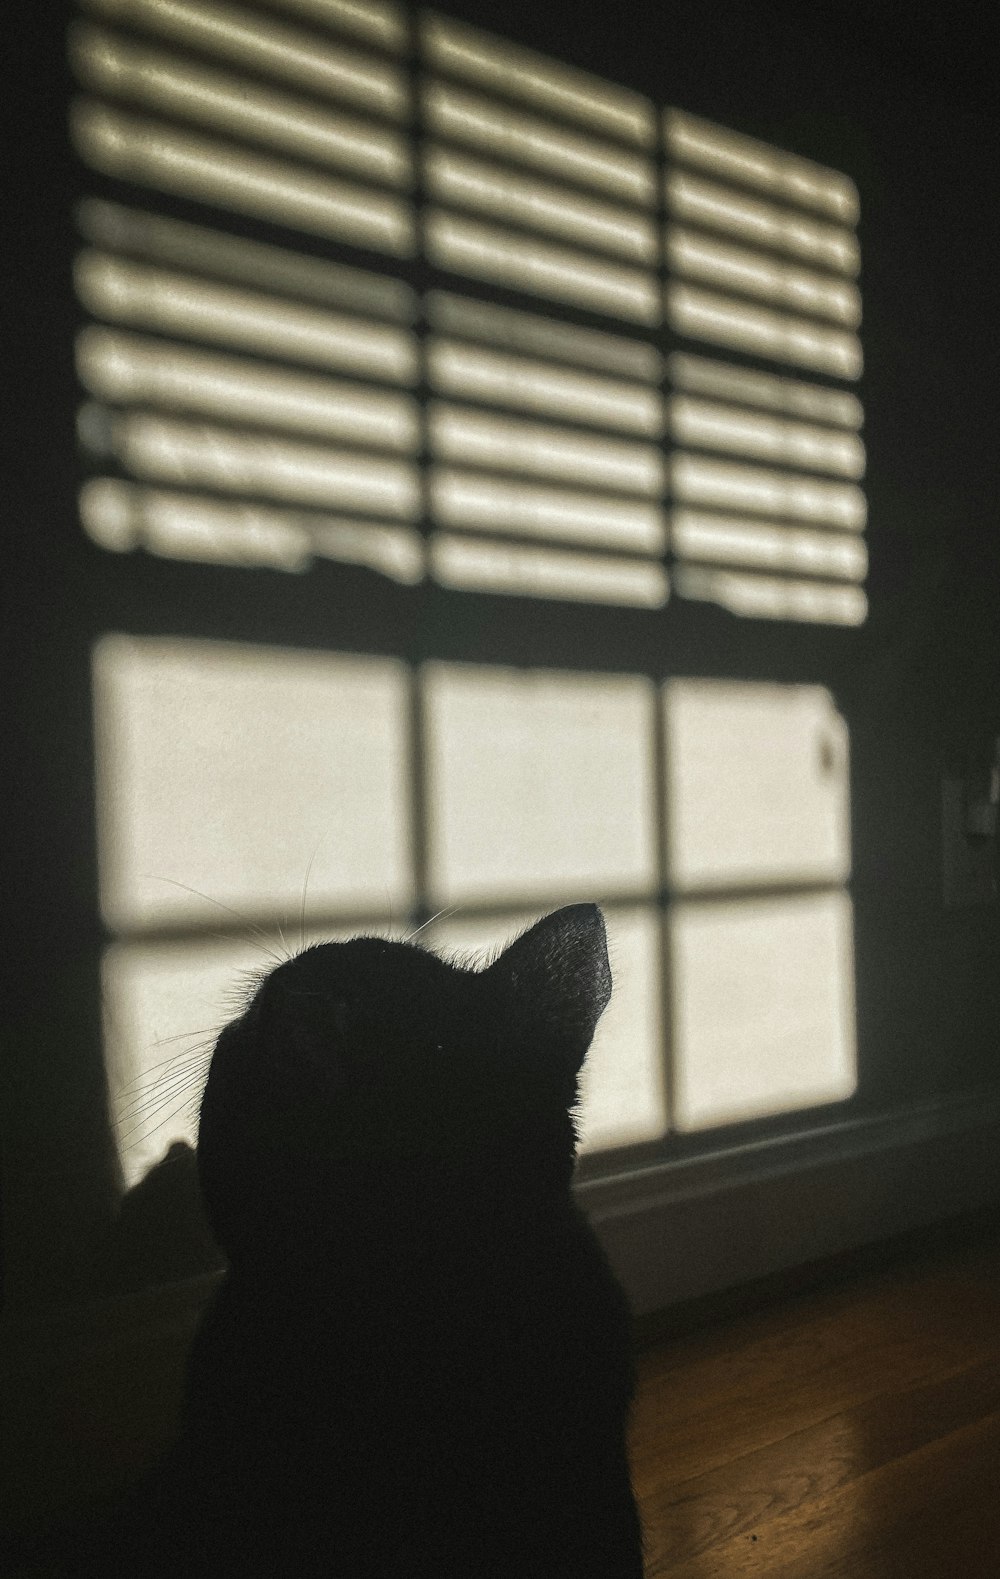 a cat looking out a window